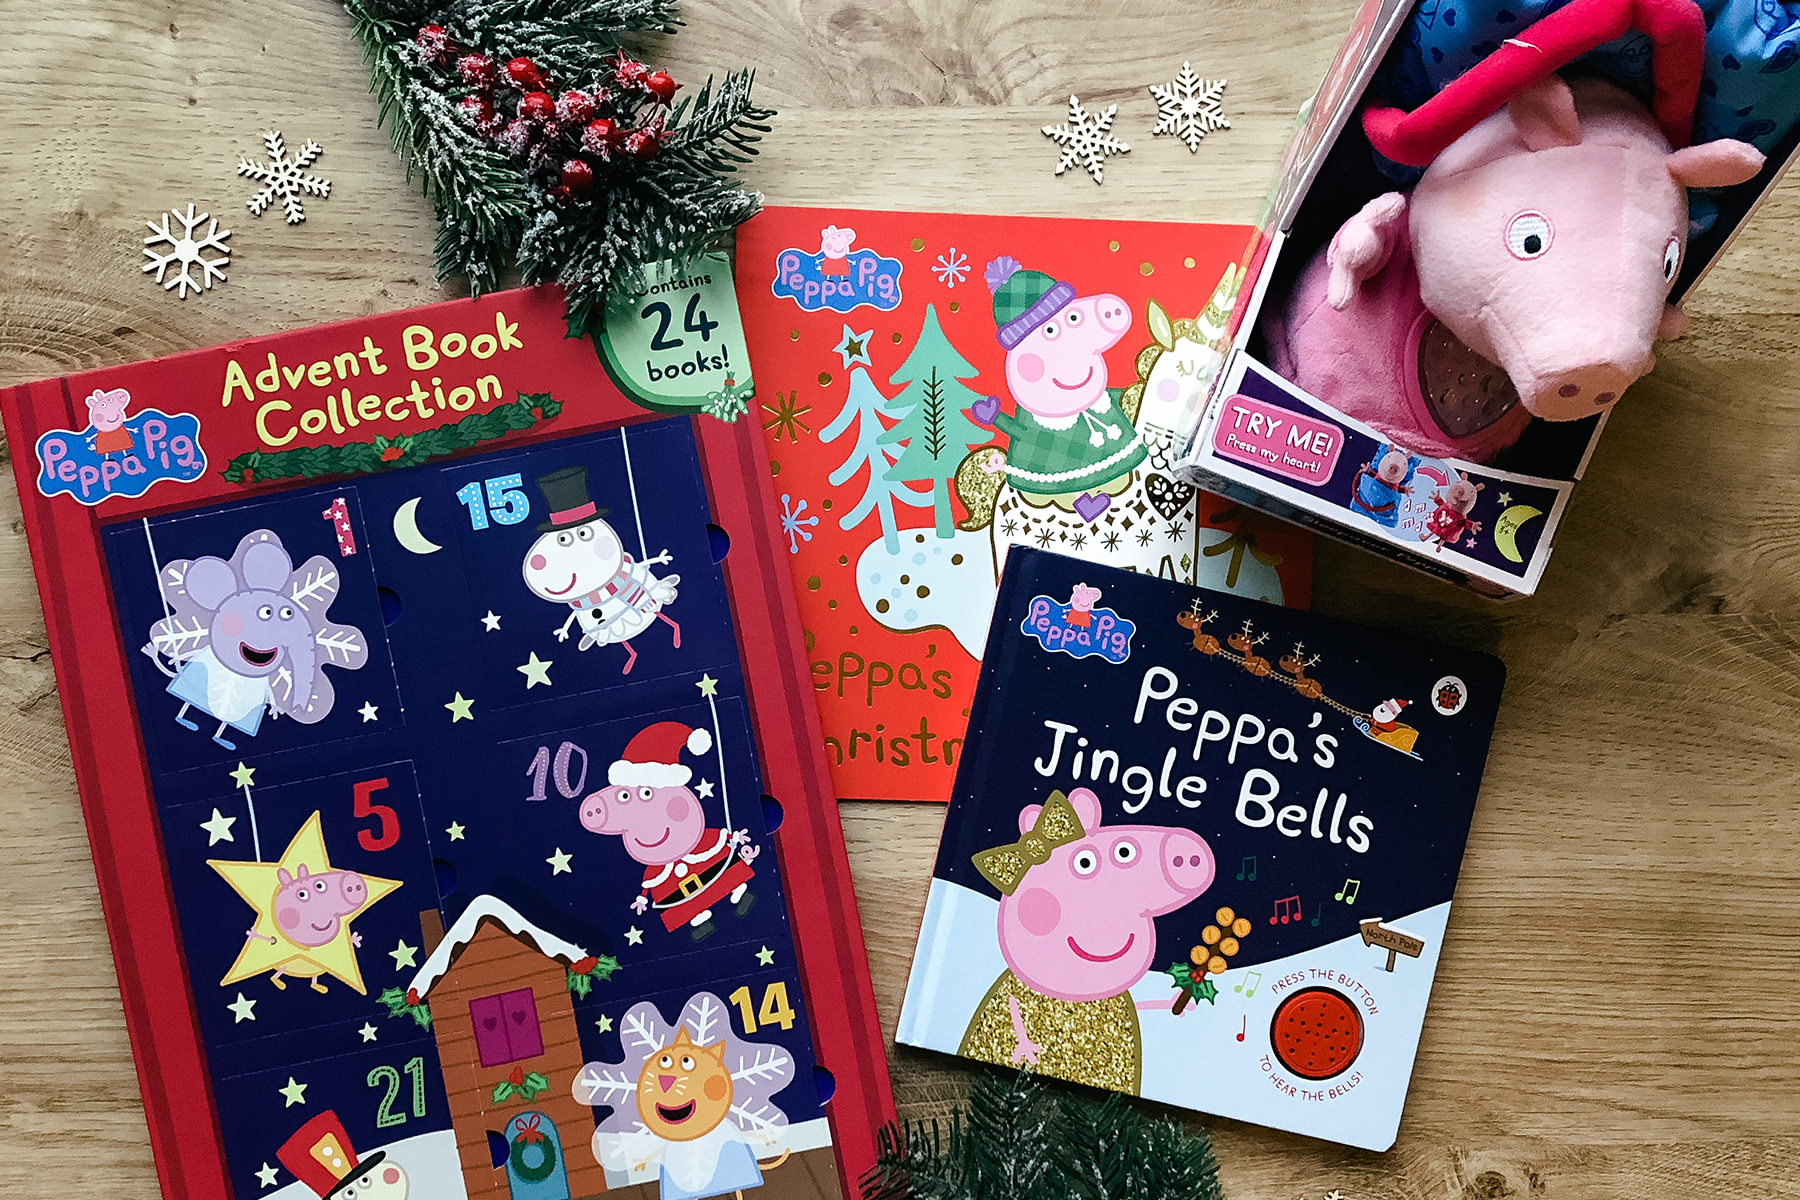 A photo of a selection of Peppa Pig books